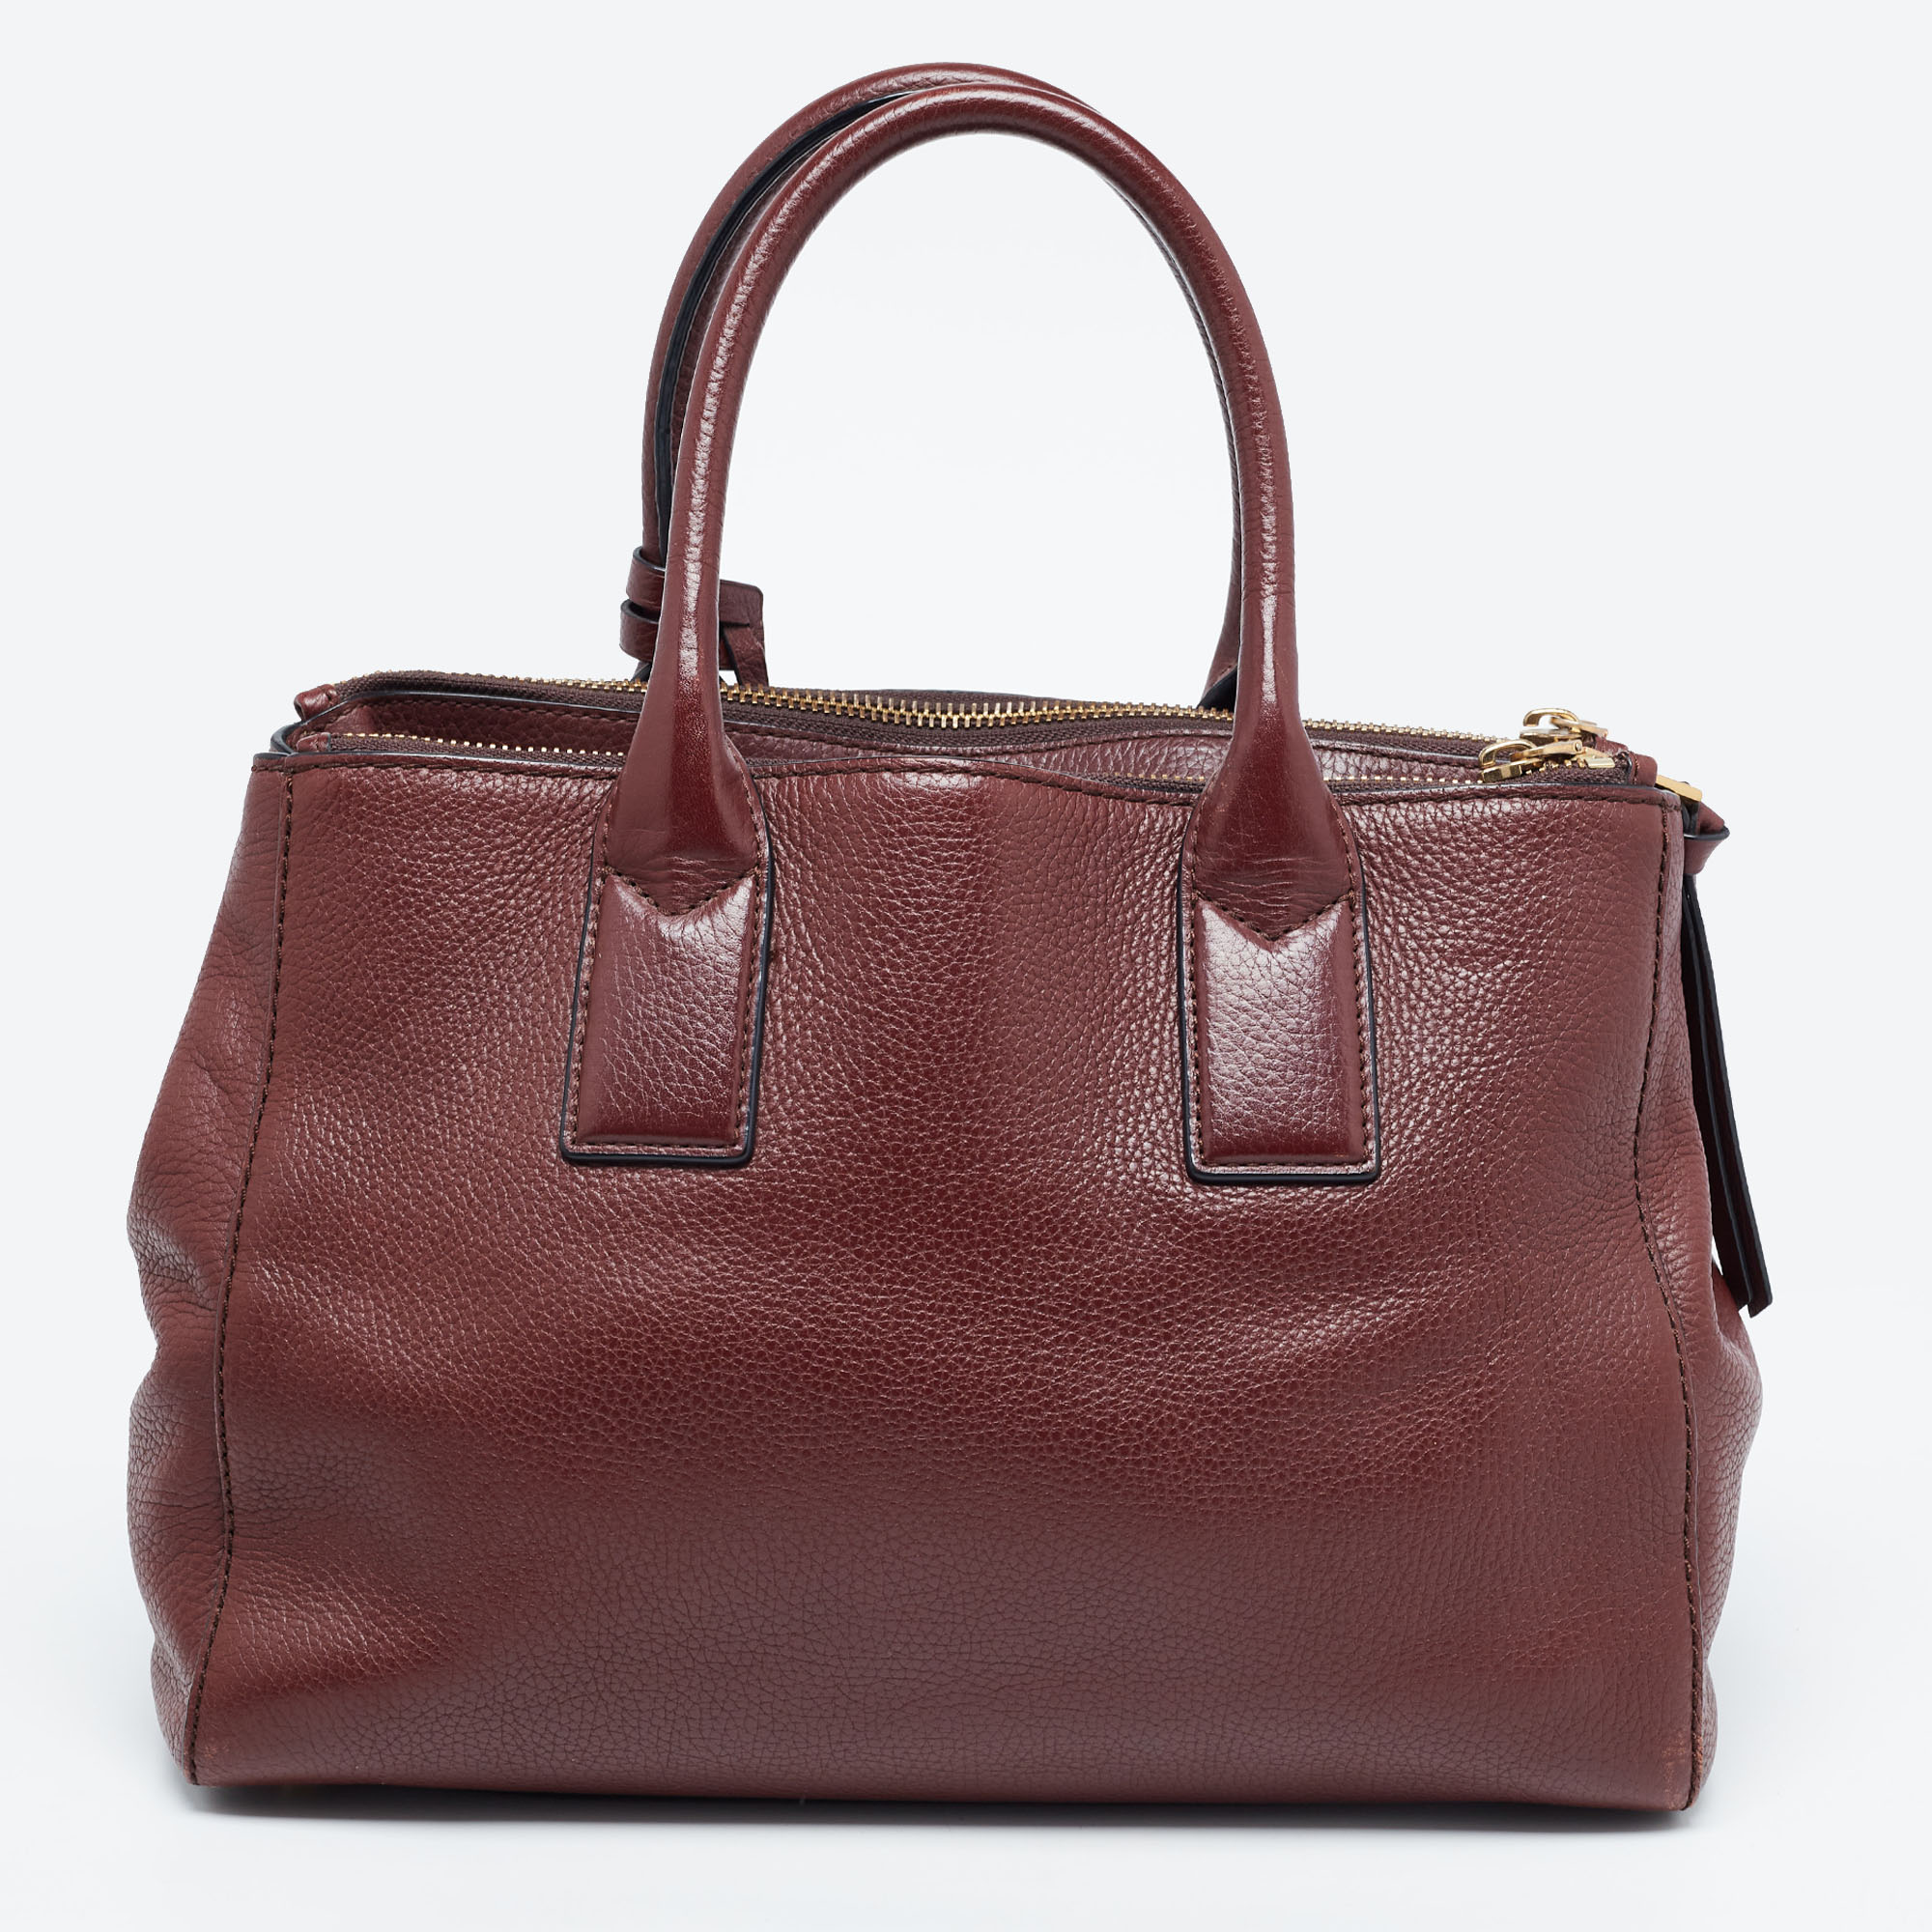 Marc Jacobs Burgundy Leather Recruit East West Tote